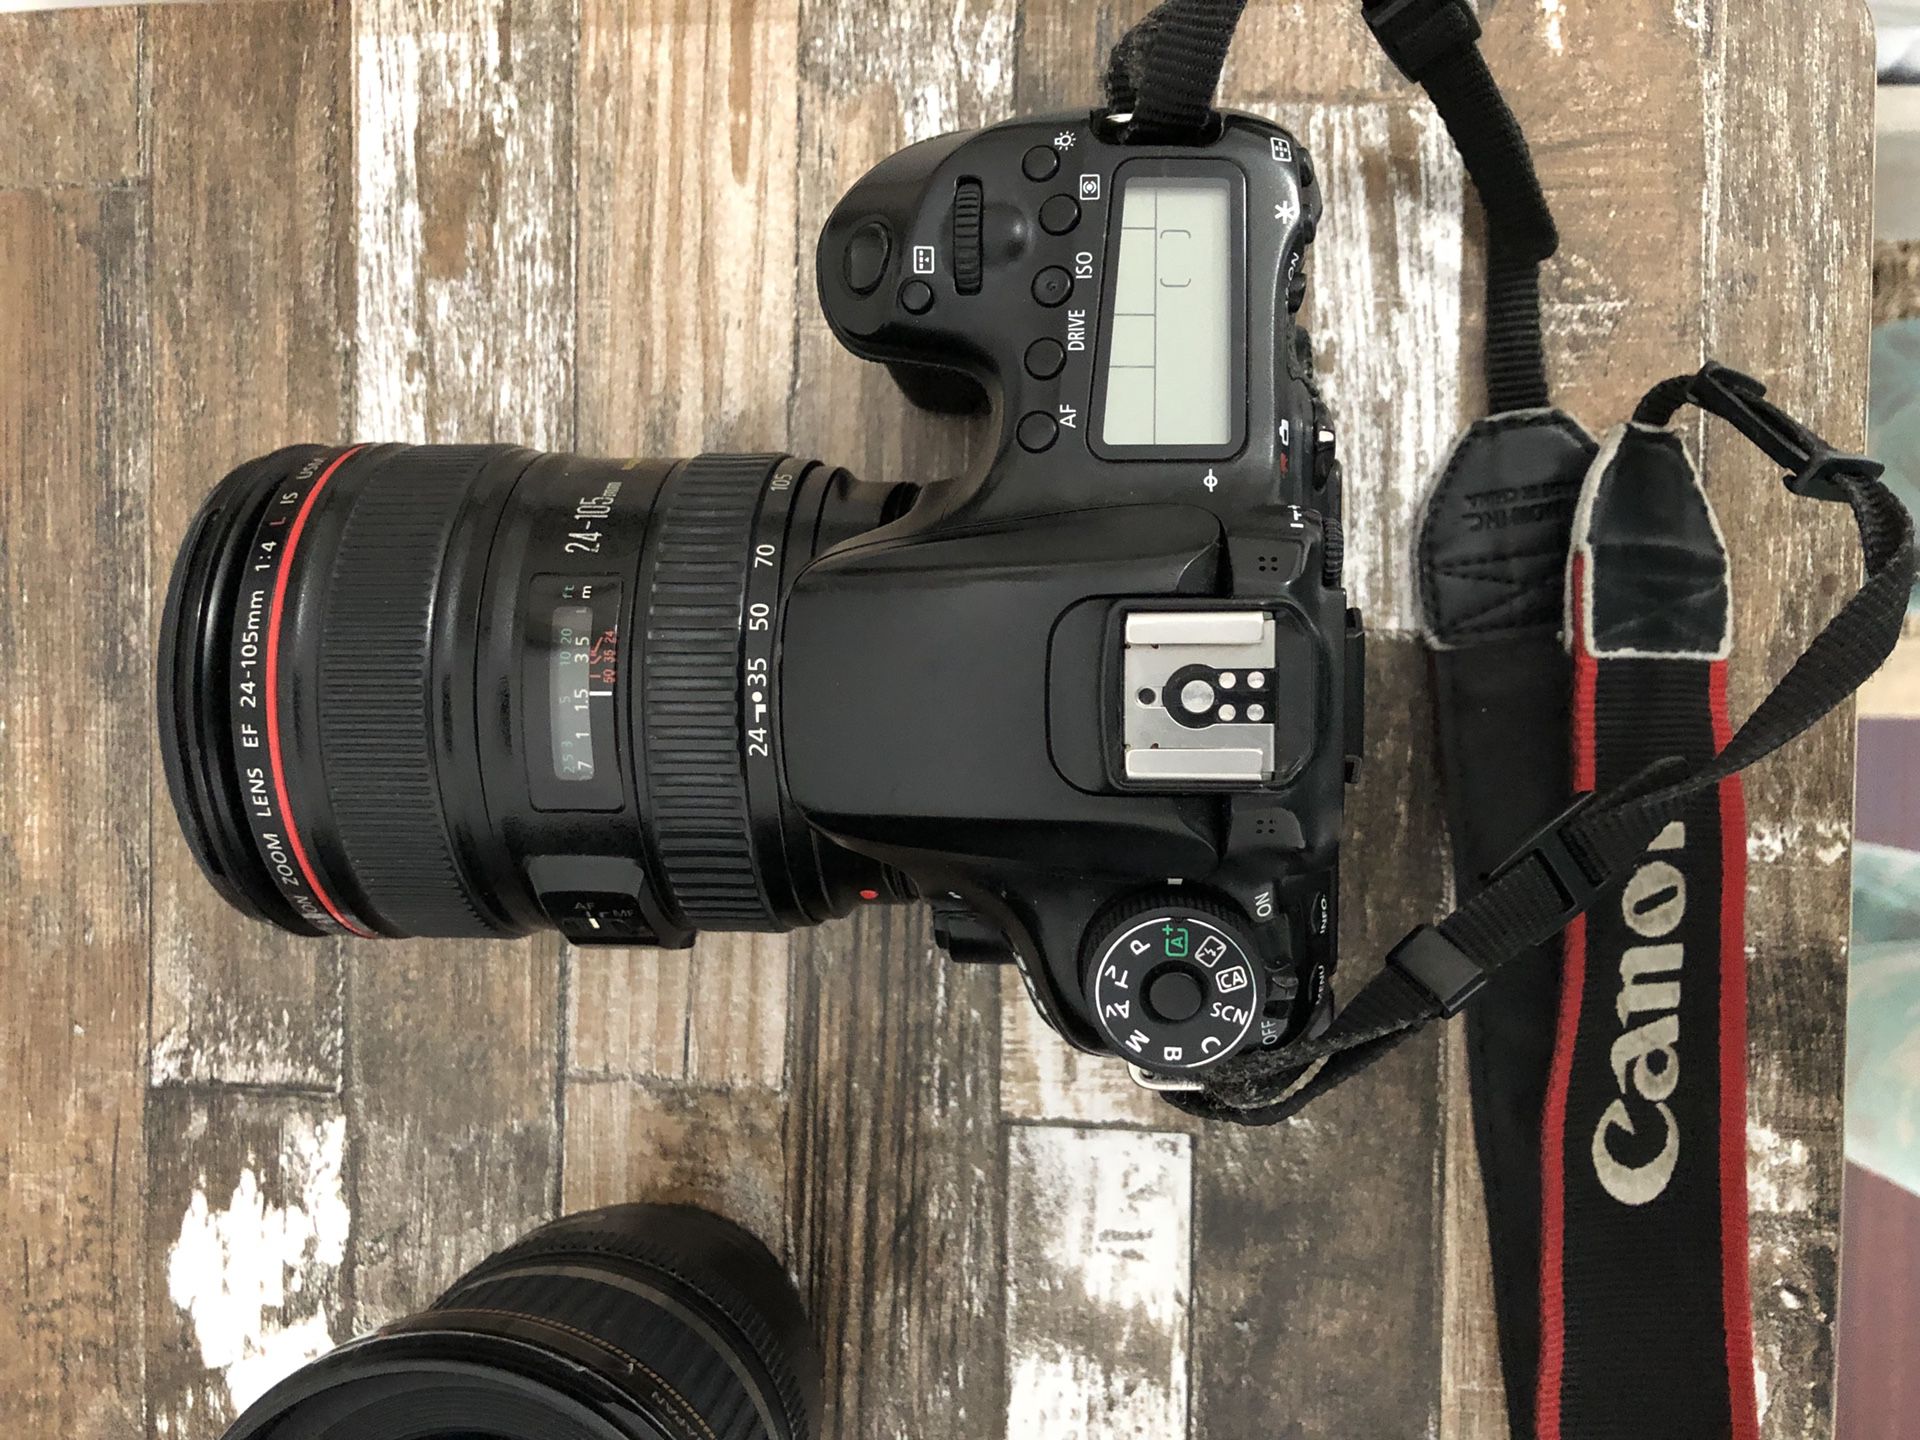 Canon 70D DSLR Camera Reconditioned | 24-105 mm Zoom Lens, 10-22 mm Wide Lens